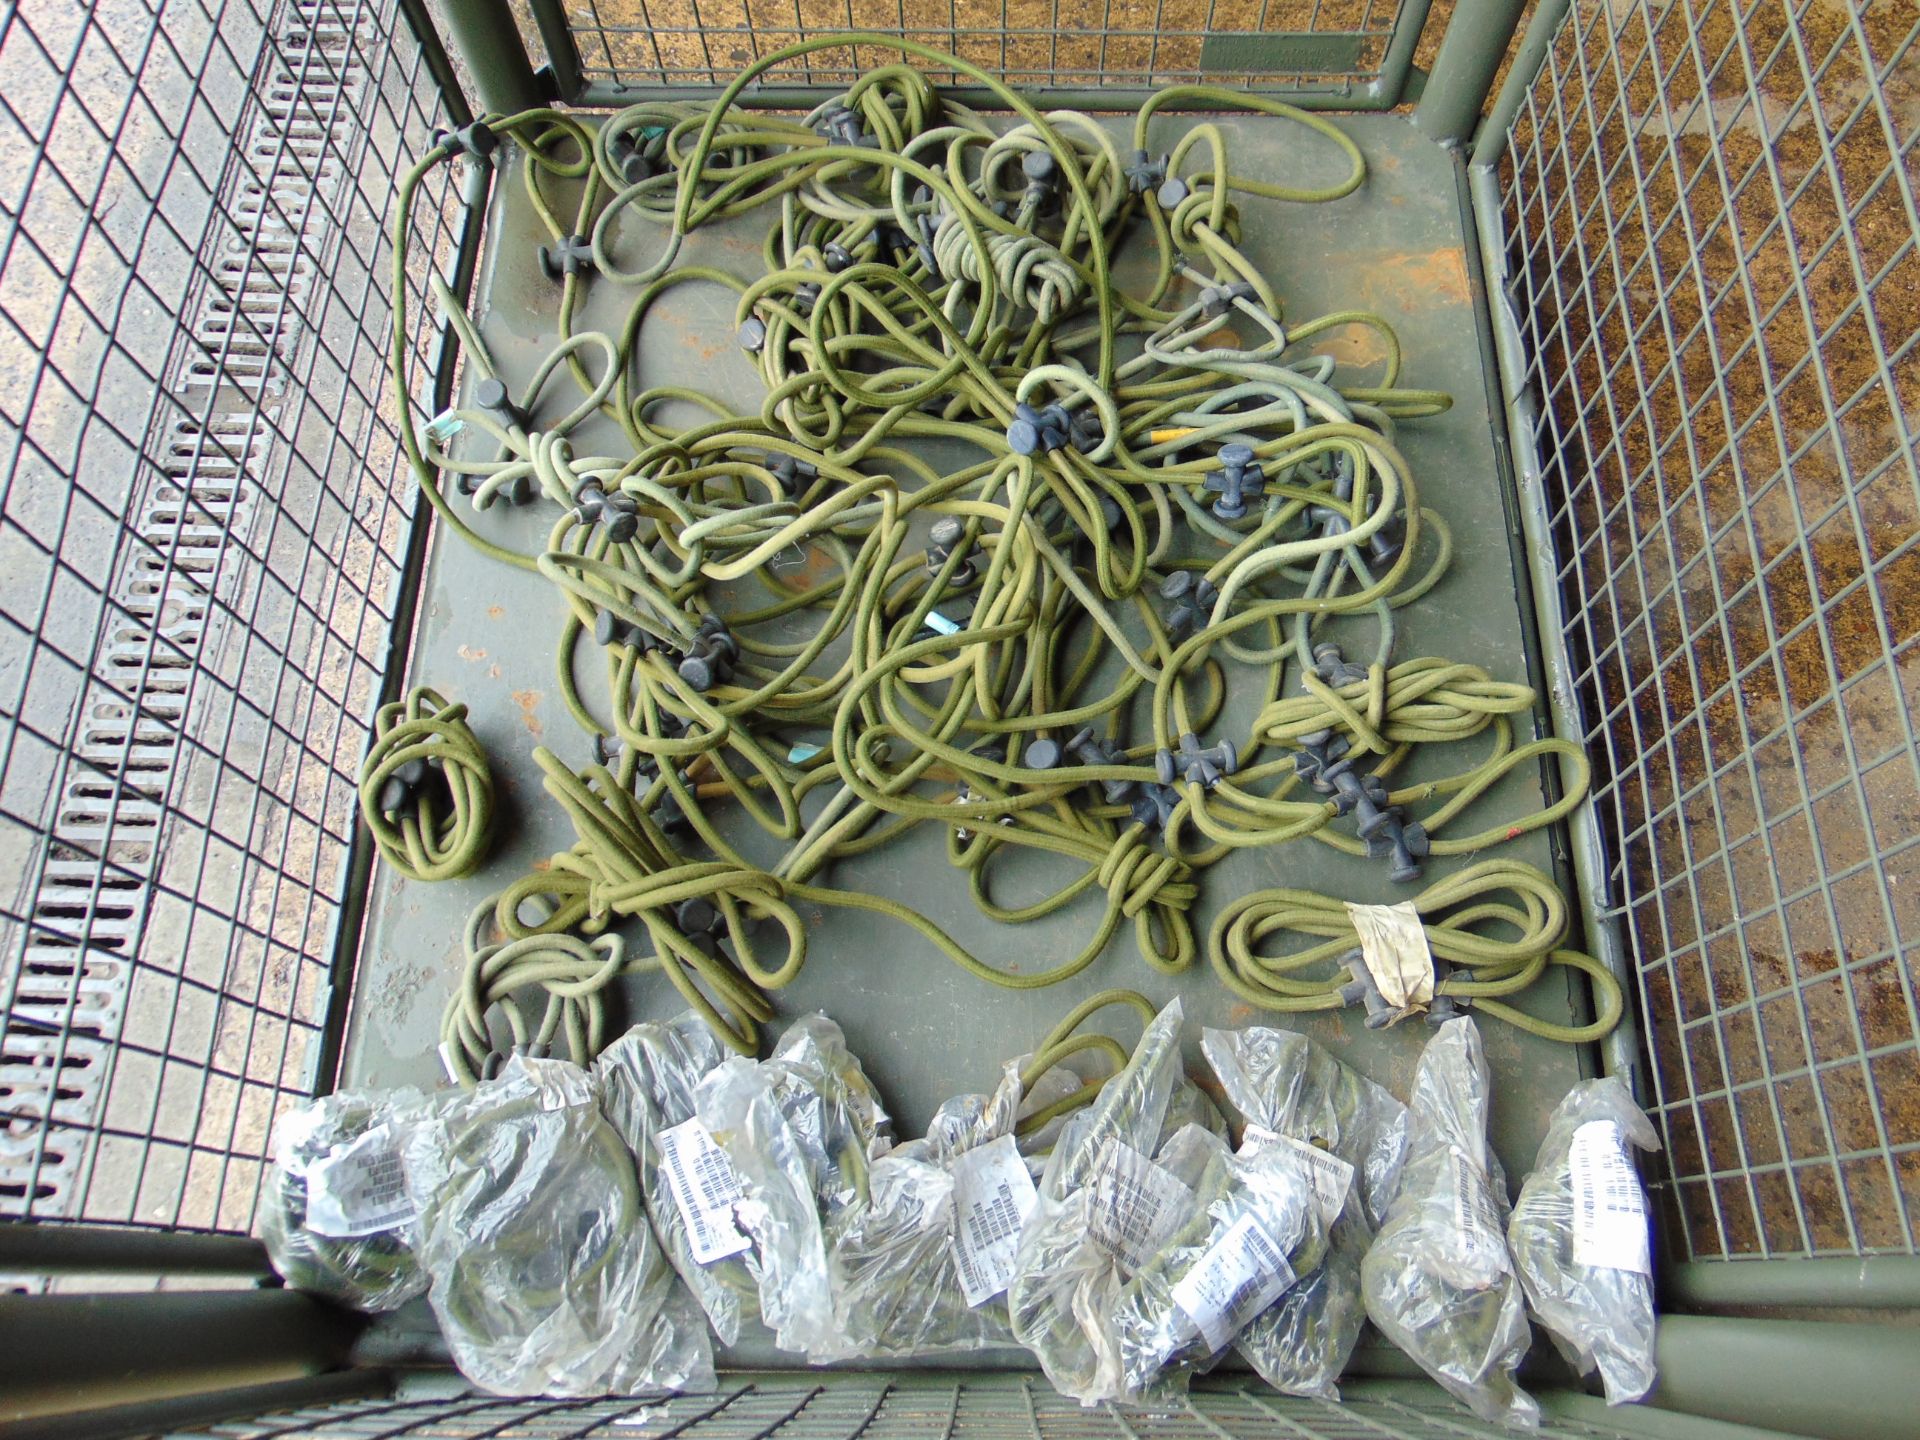 1 x Stillage of Elastic Bungee Securing Cords - Image 3 of 5